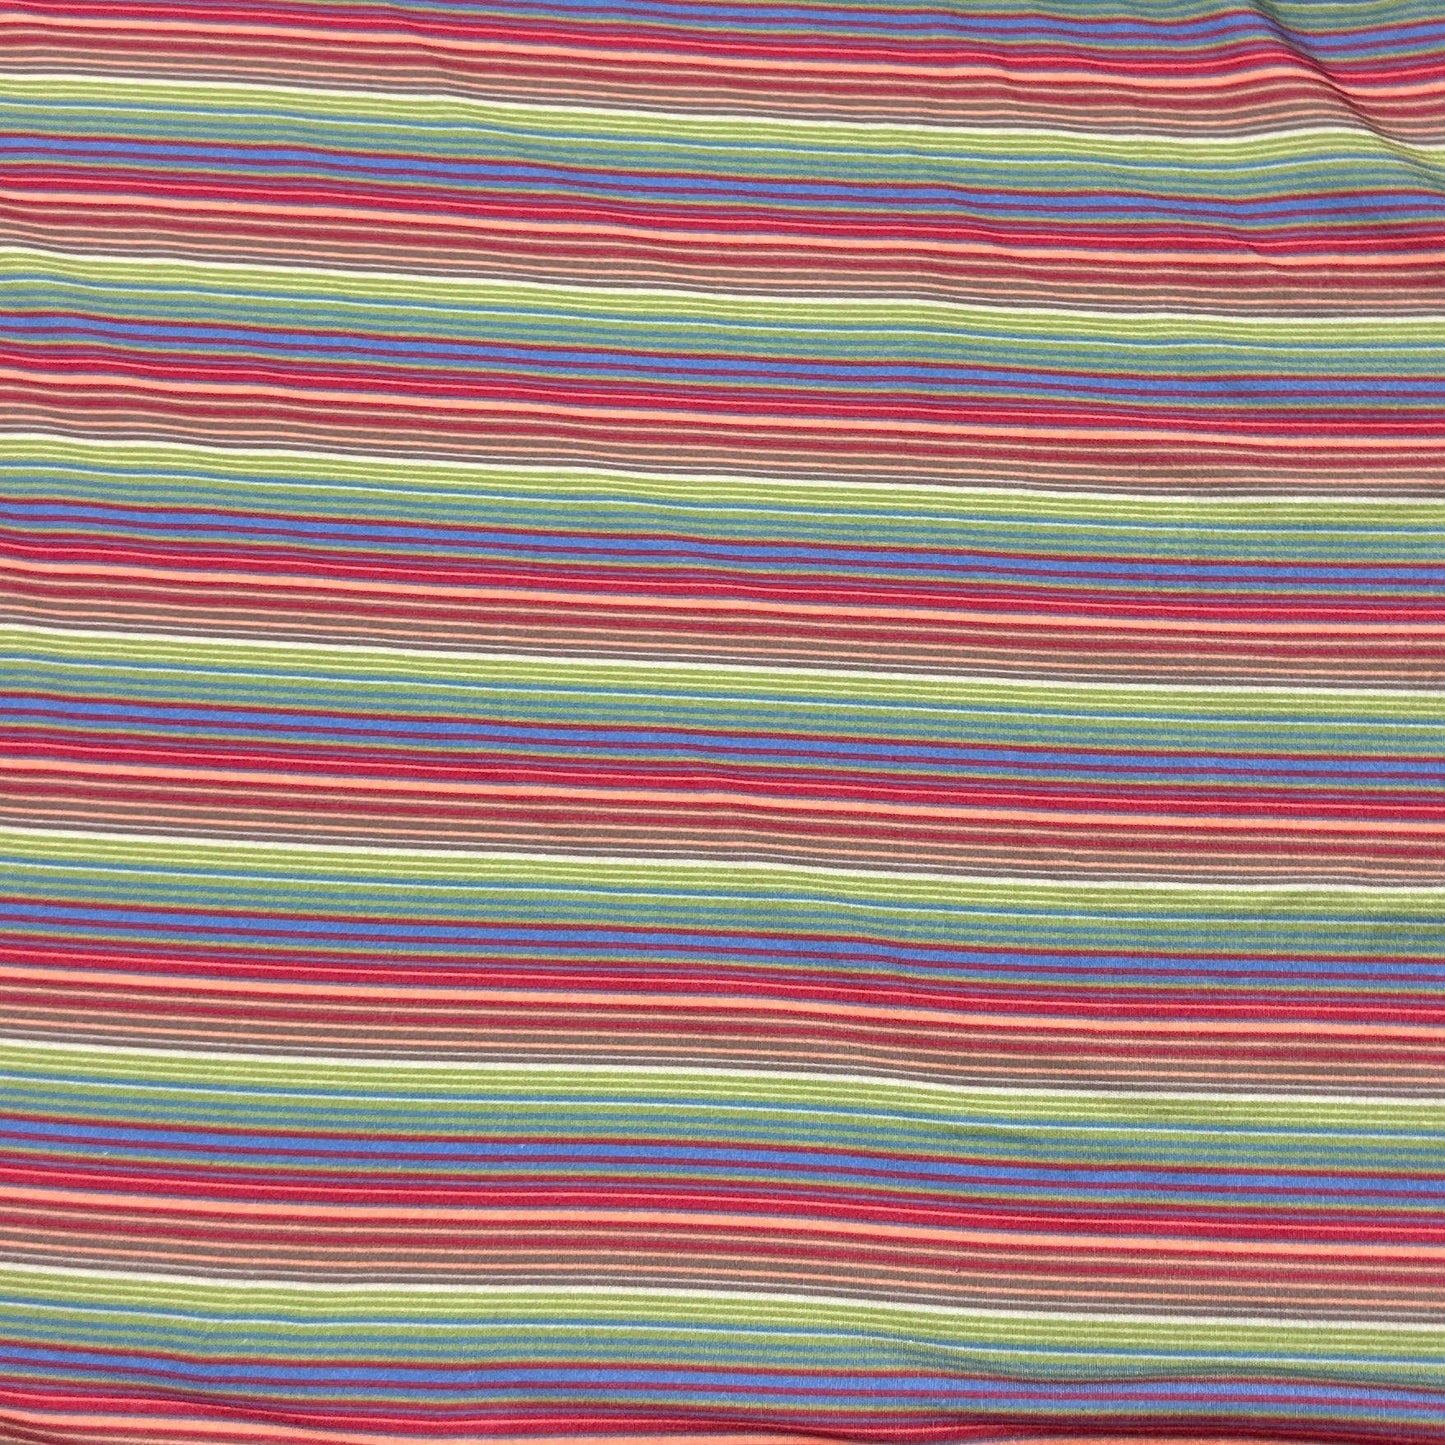 Green and Rust Stripes on Polyester/Spandex Jersey Fabric - Nature's Fabrics